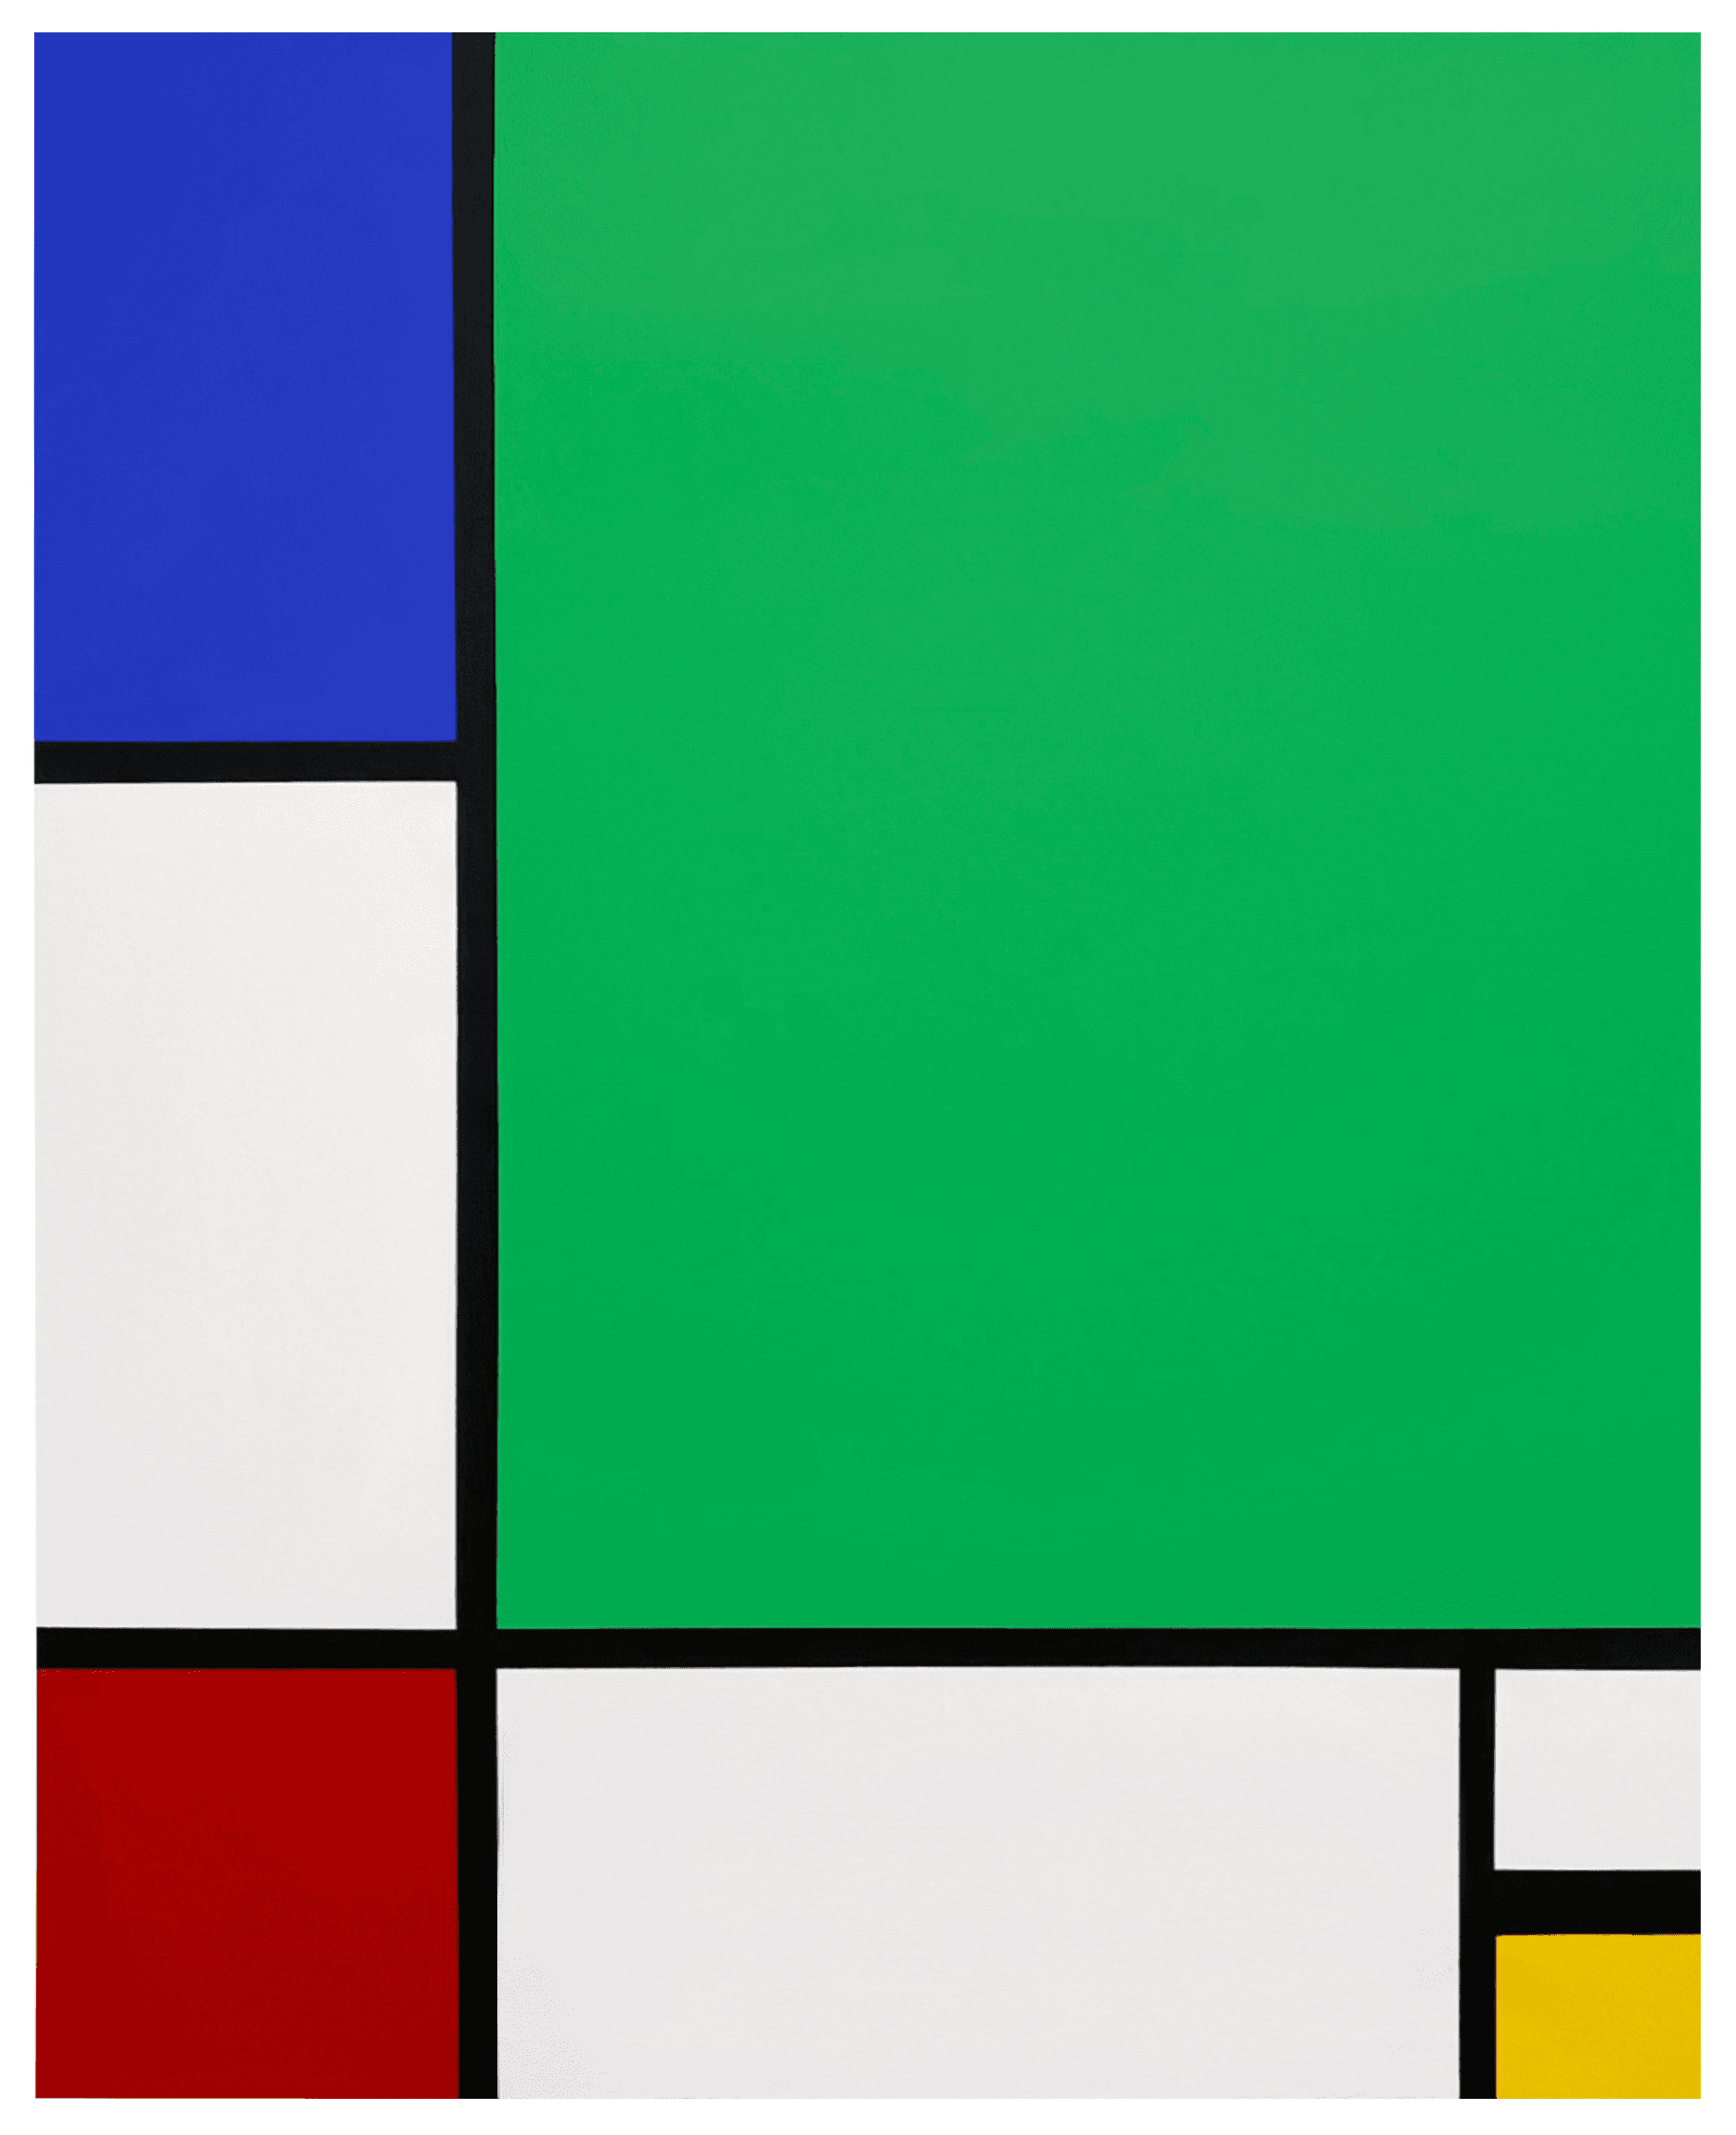 PEPE MONDRIAN (Composition with GREEN, RED, BLUE and YELLOW)